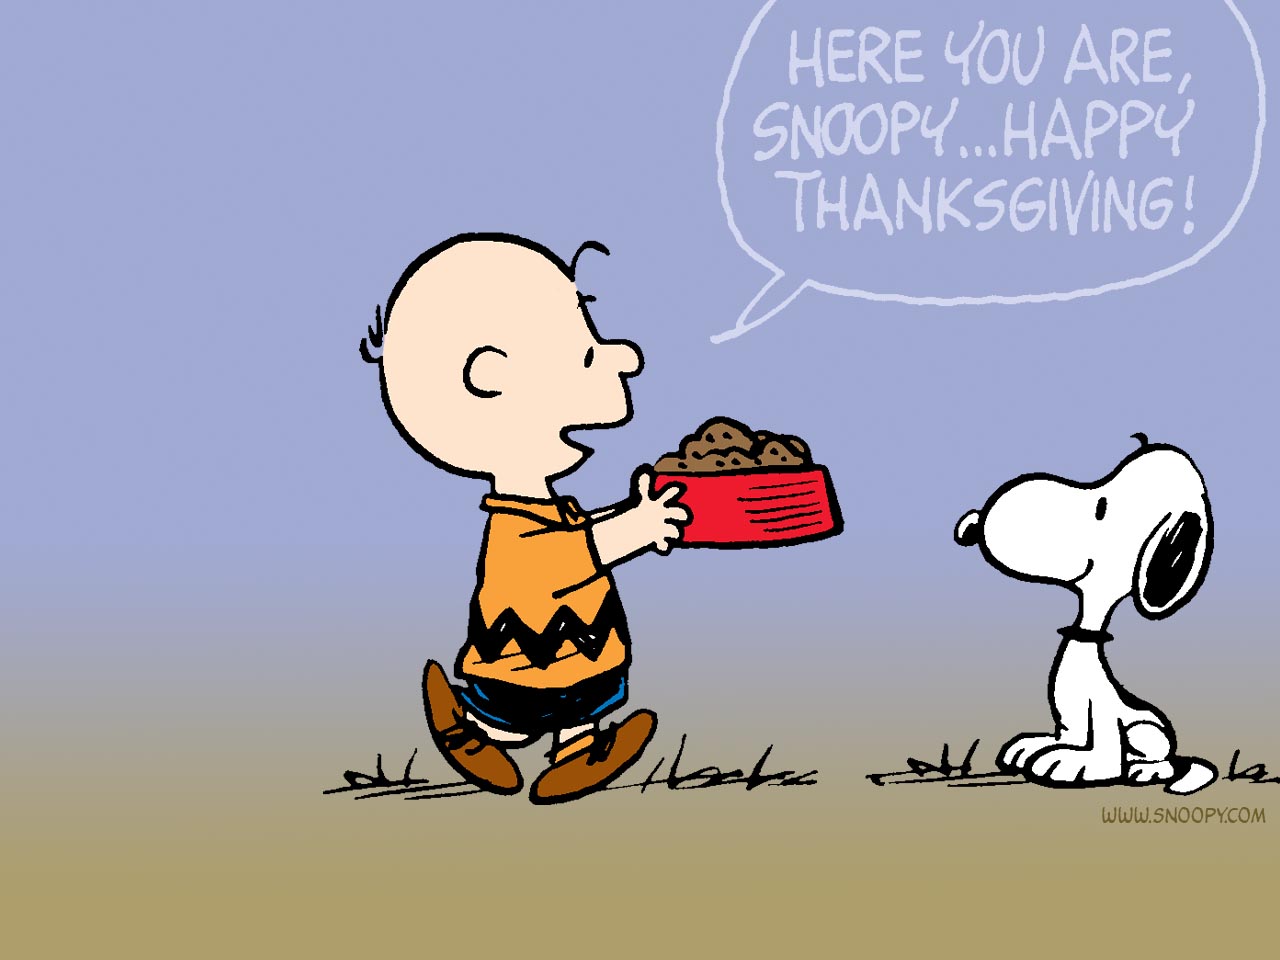 189-1891706_happy-thanksgiving-meme-to-family-and-friends.jpg